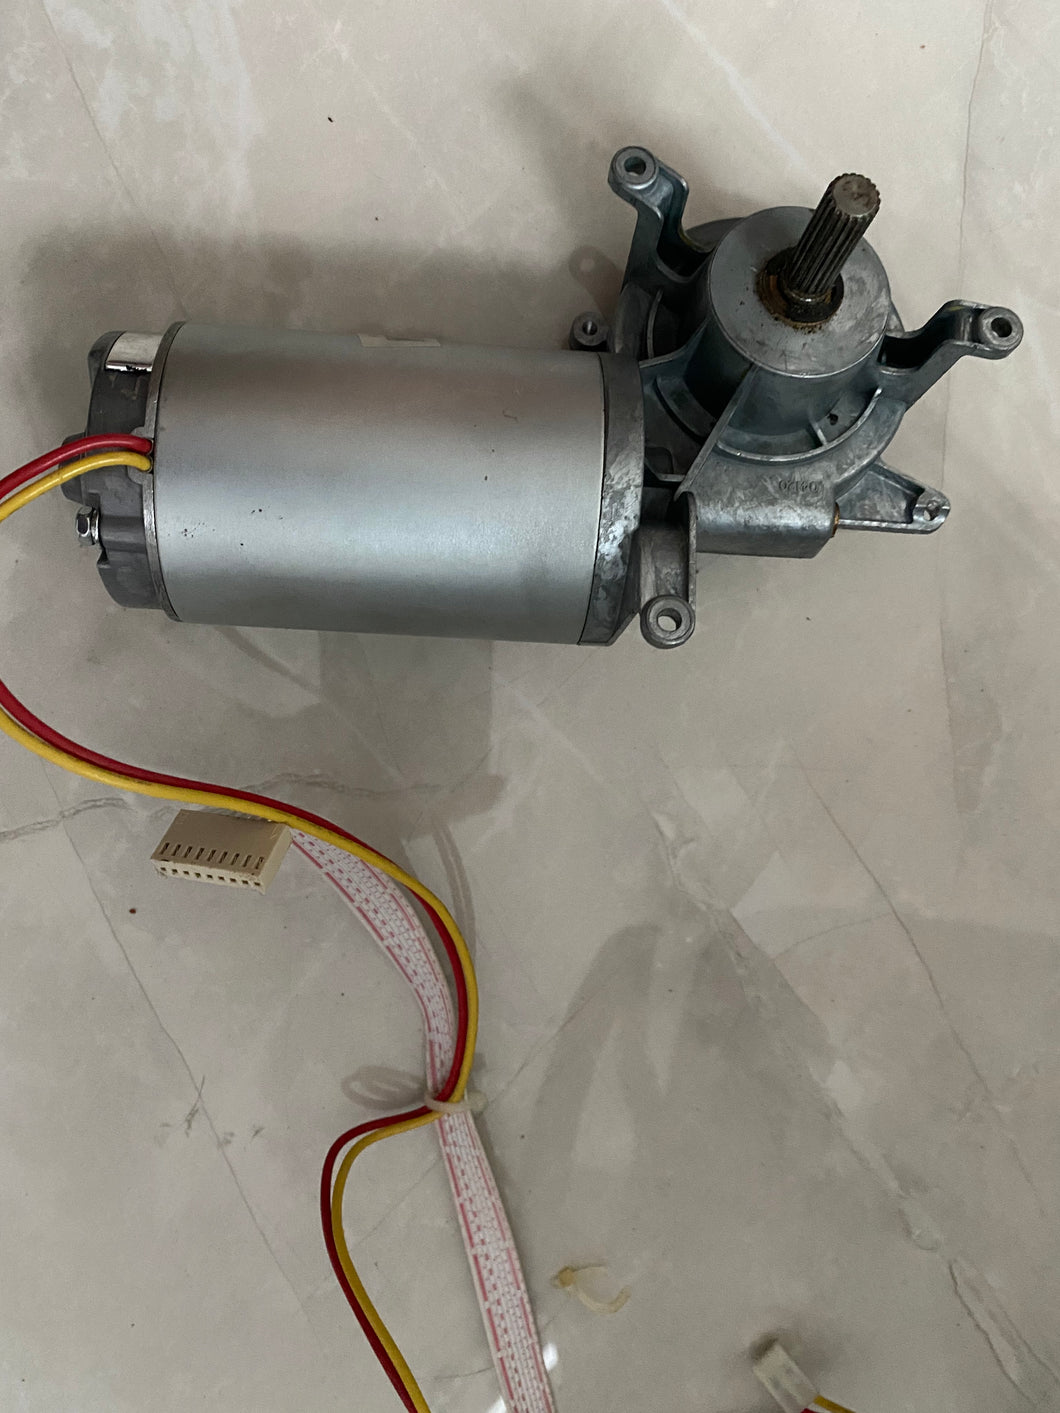 ATA Geared Motor Assembly 14V3 Suits GDO9v2 Gen 2 B&D BND CAD P SDO2v1 - 60339 sectional door part (used) - LOCKMATIC